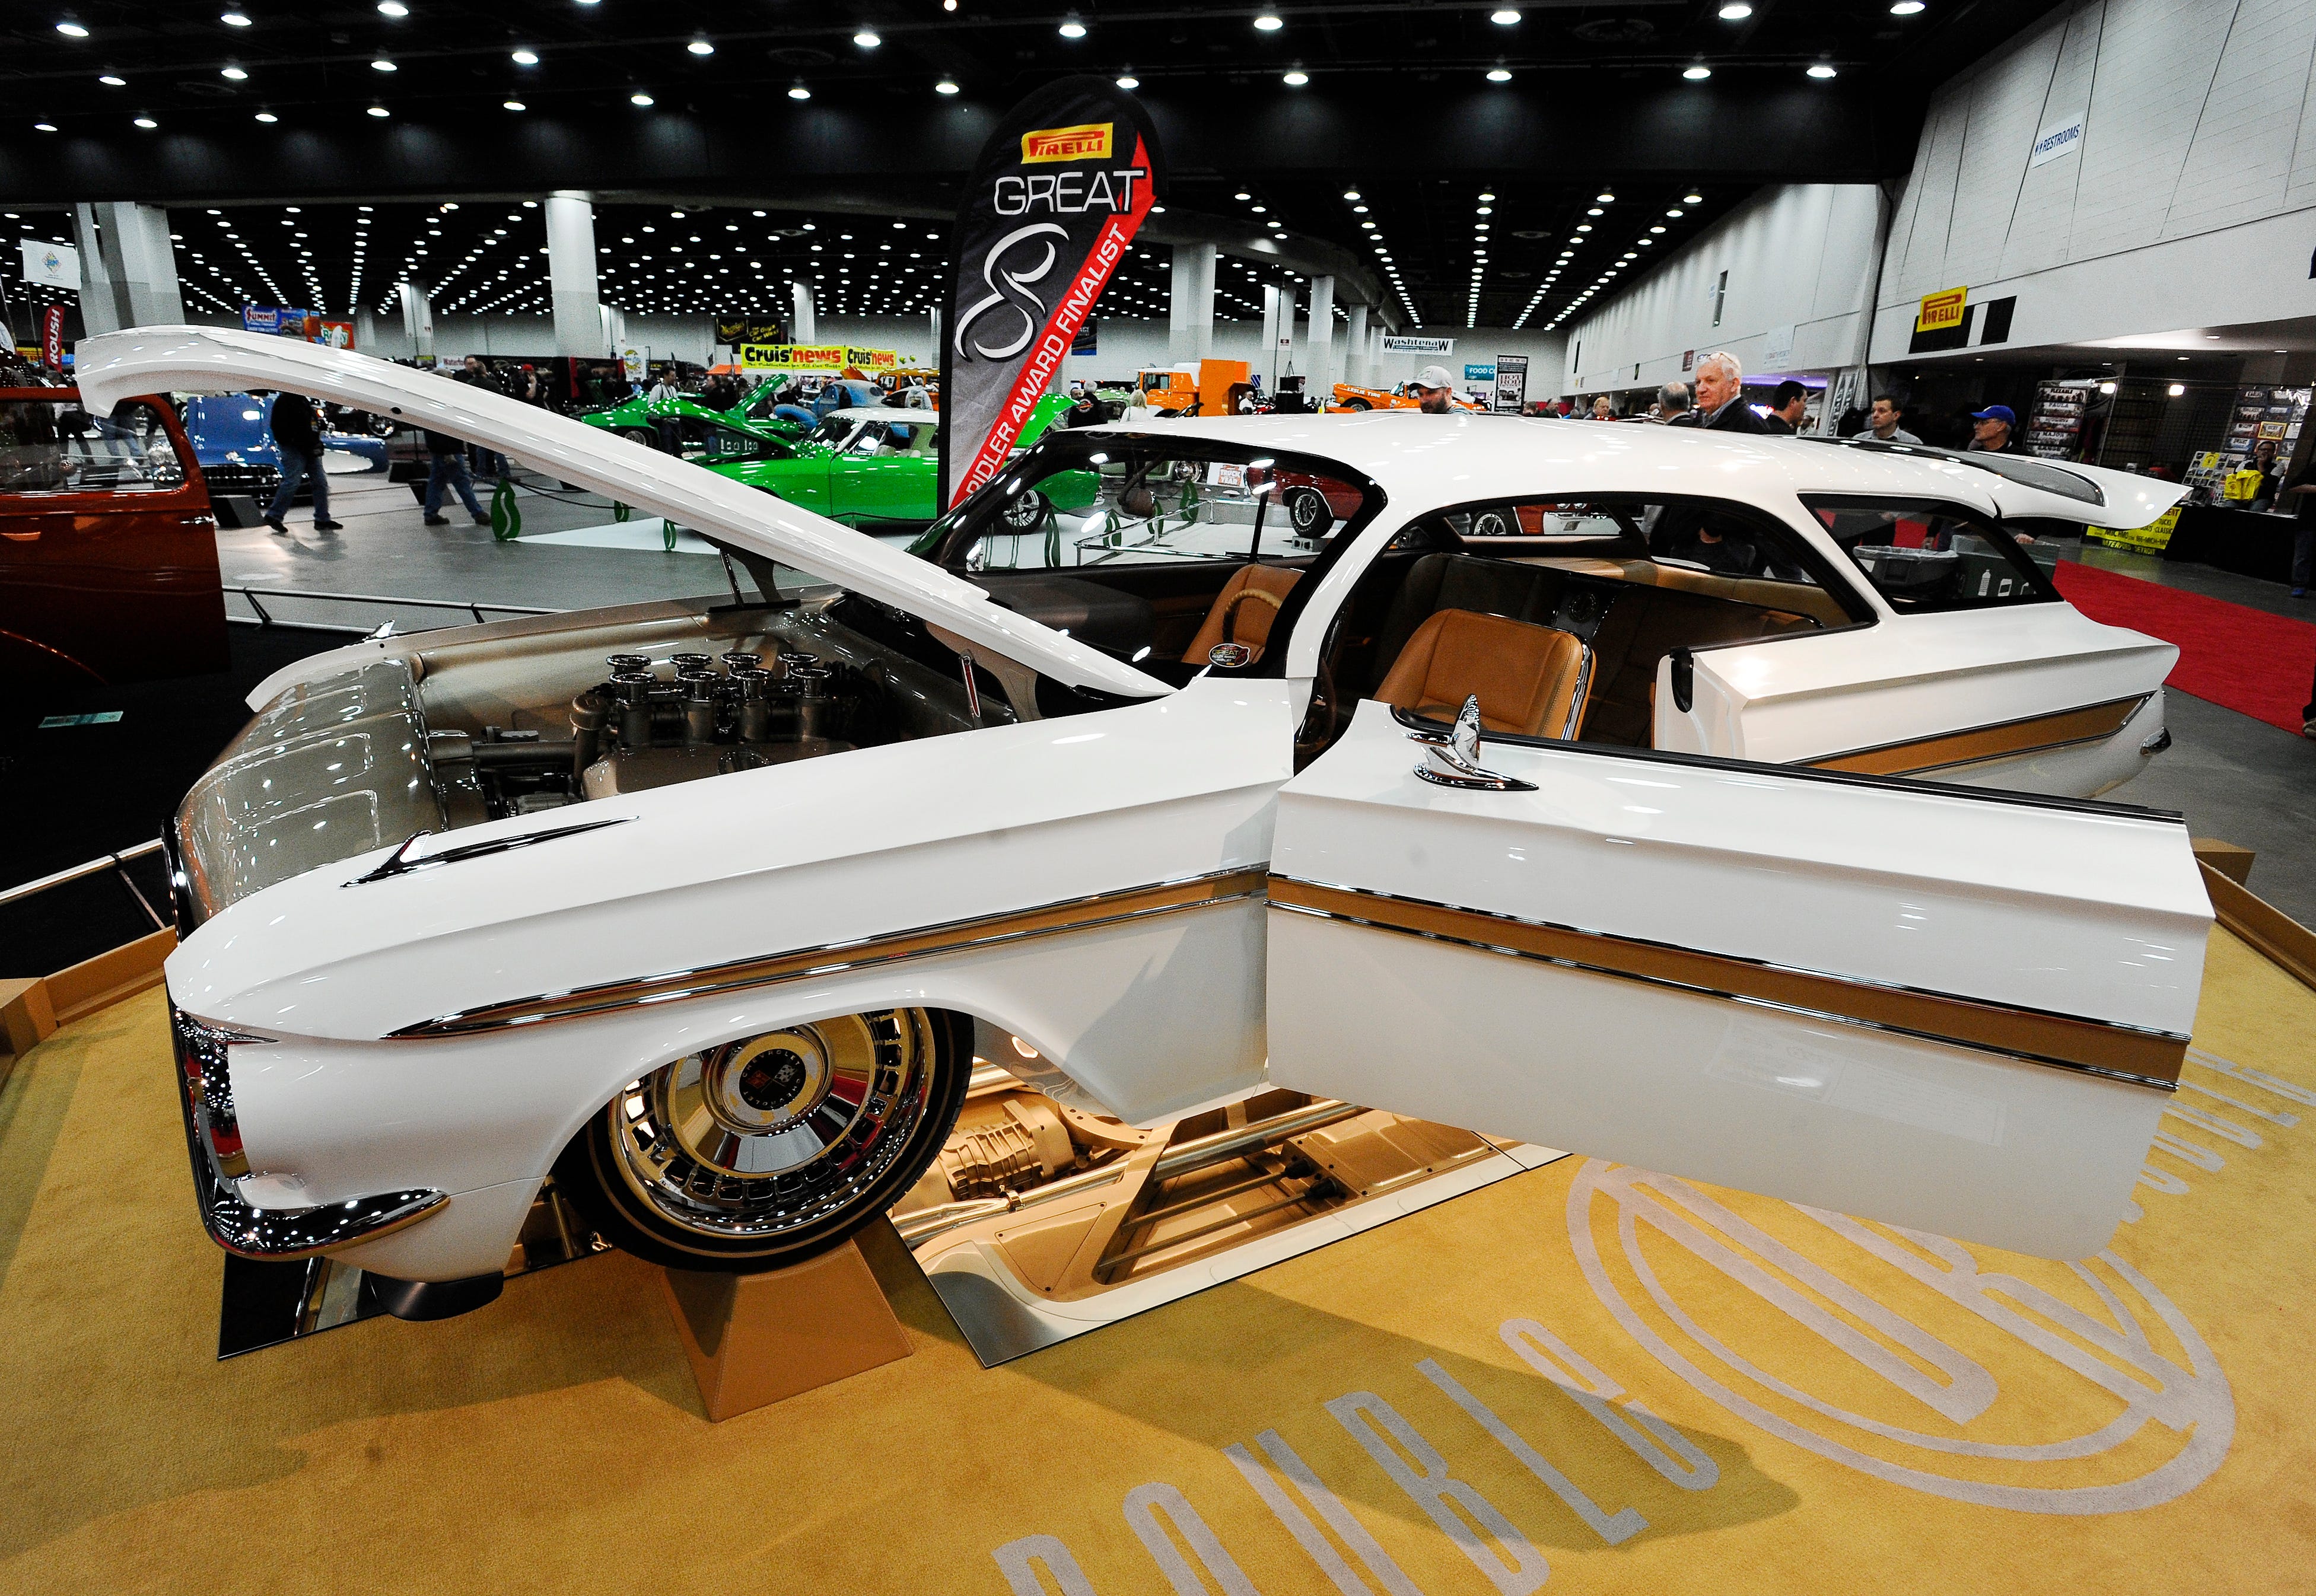 Joe Horisk's 1961 Chevy Impala was created from parts of  two Chevy Bubbletop coupes to create an amazing looking wagon for the Autorama show at Cobo Center in Detroit, Feb. 26, 2016.